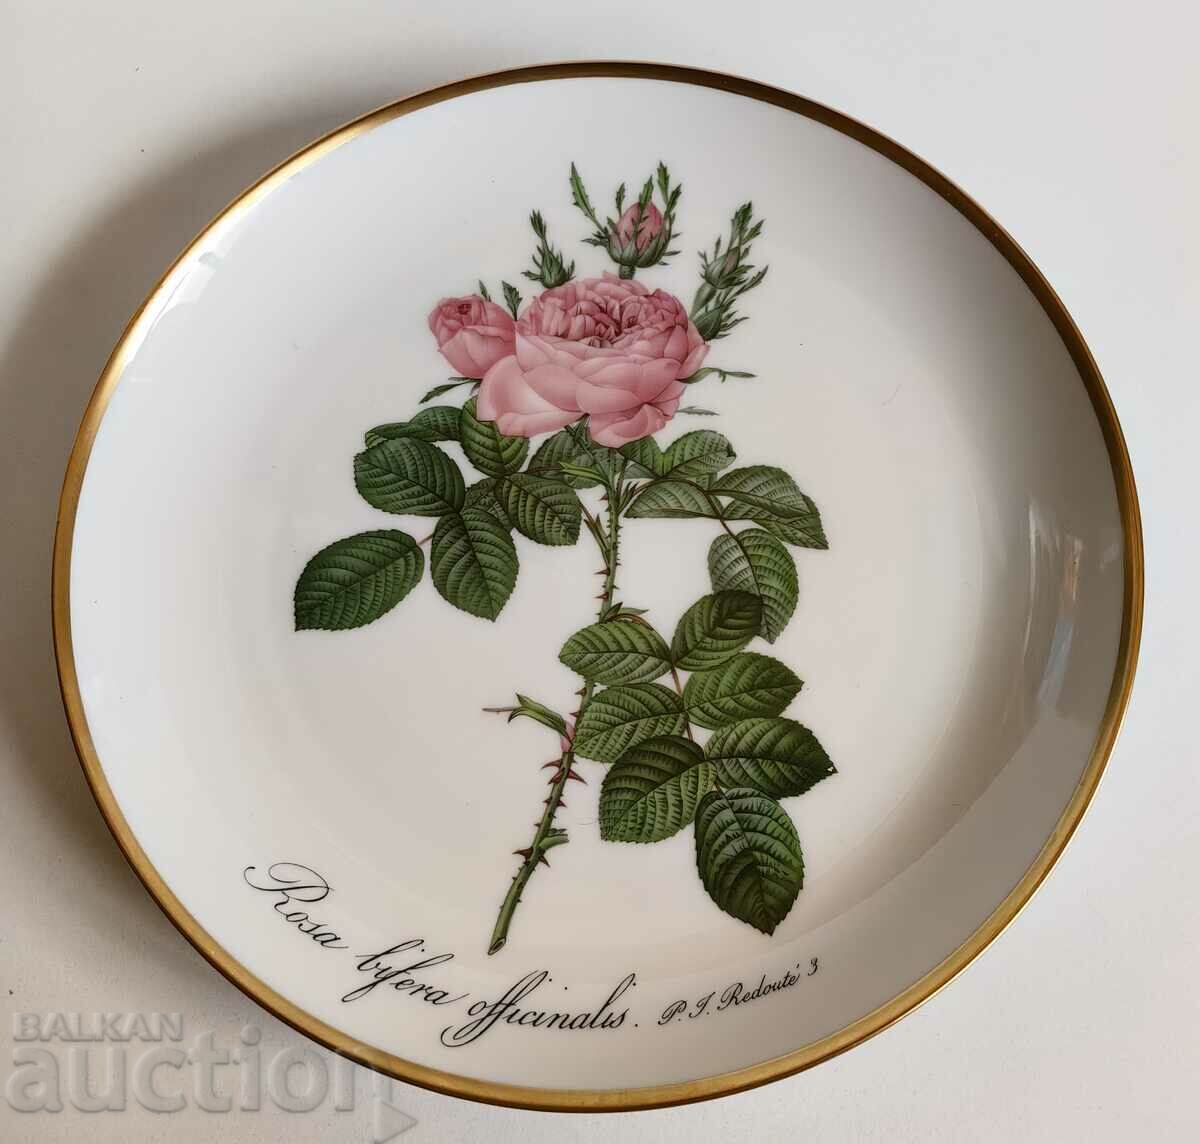 PORCELAIN PLATE ROSES FOR WALL